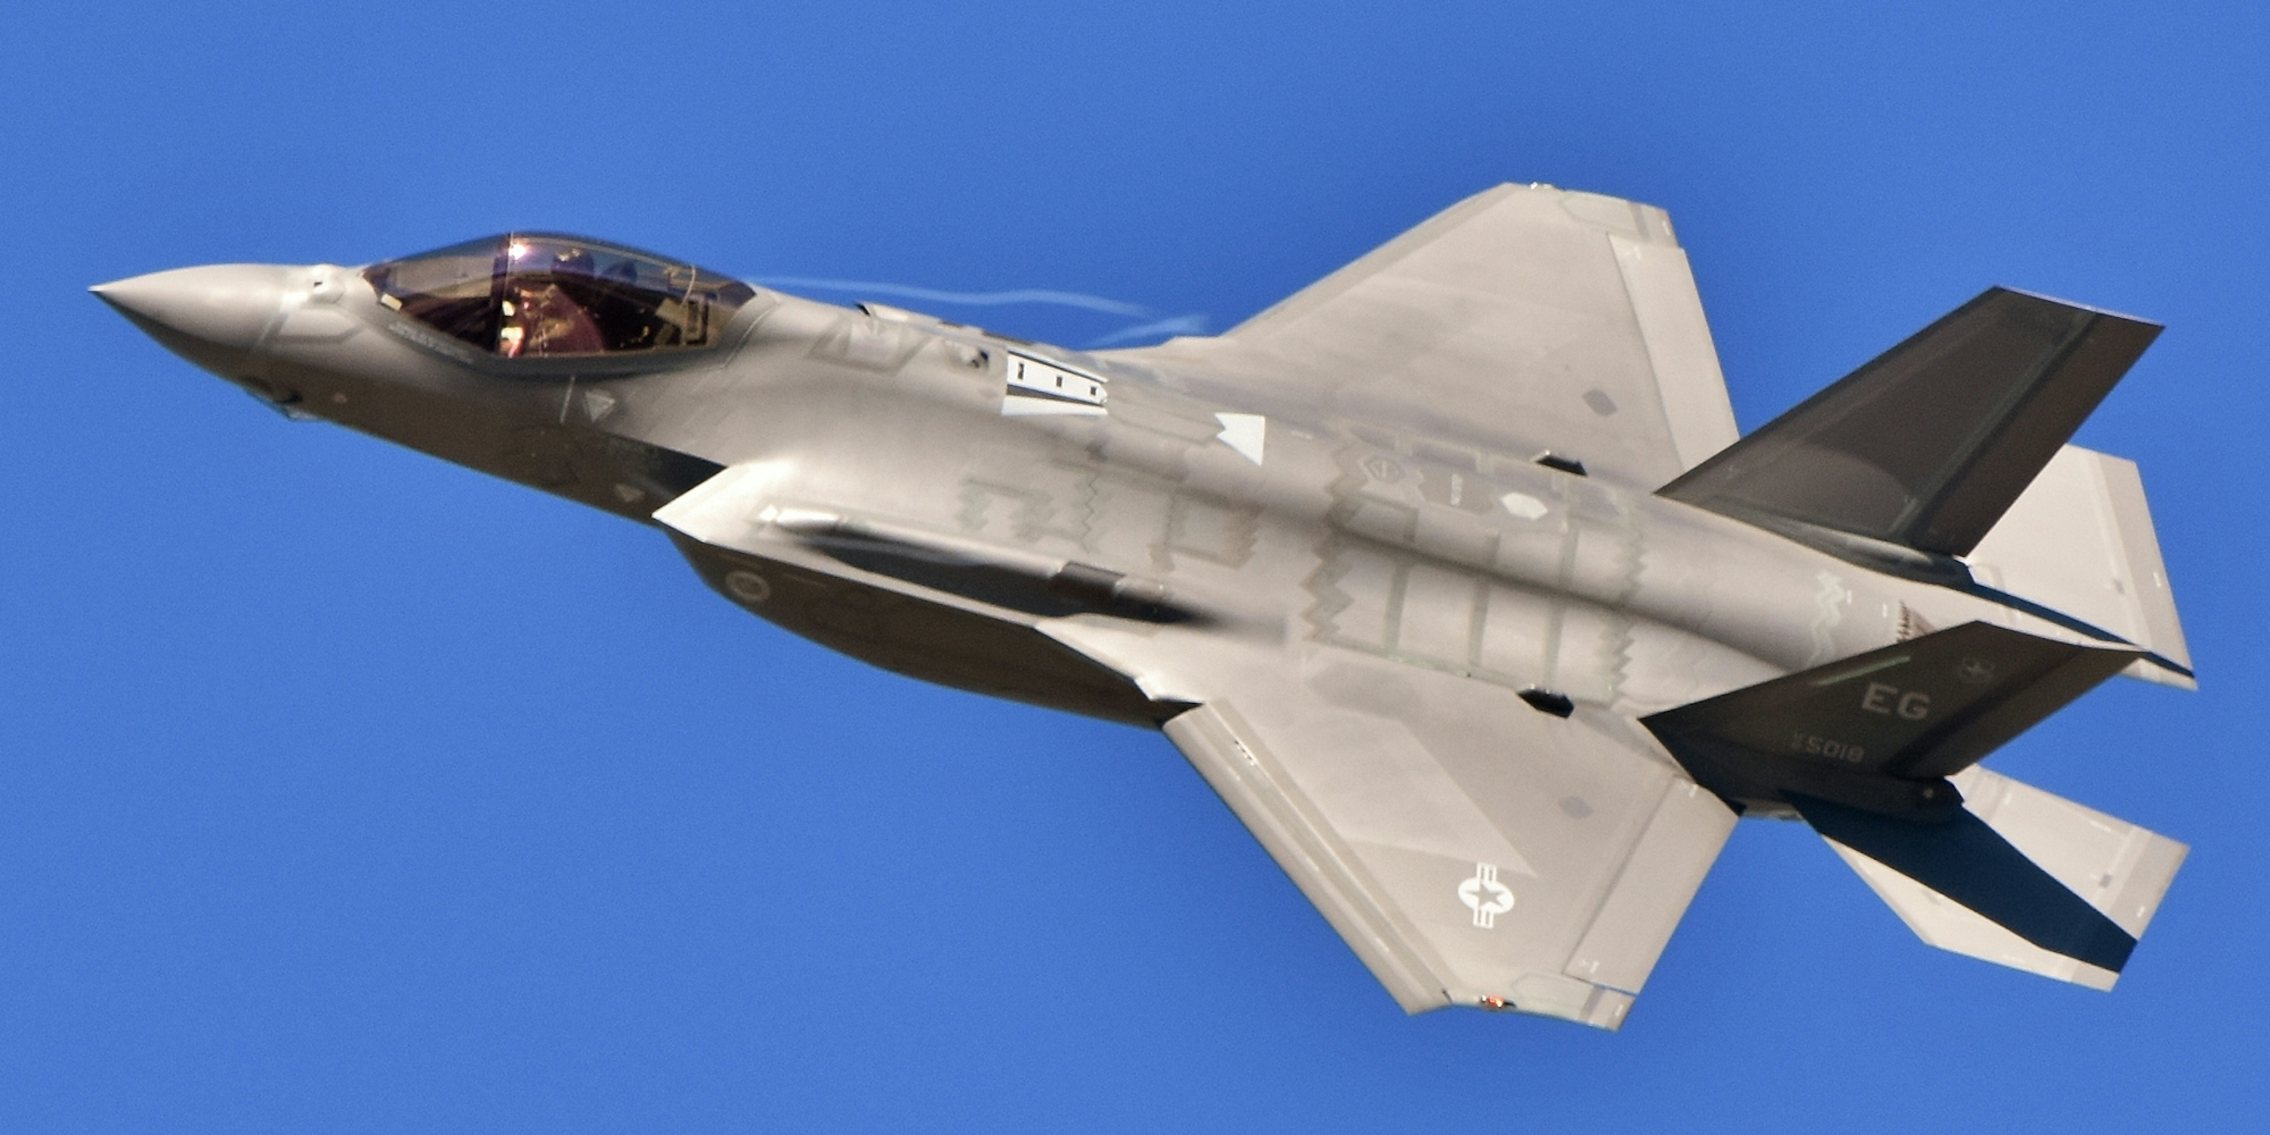 A U.S. Air Force F-35 Joint Strike Fighter (Lightning II) jet flying.